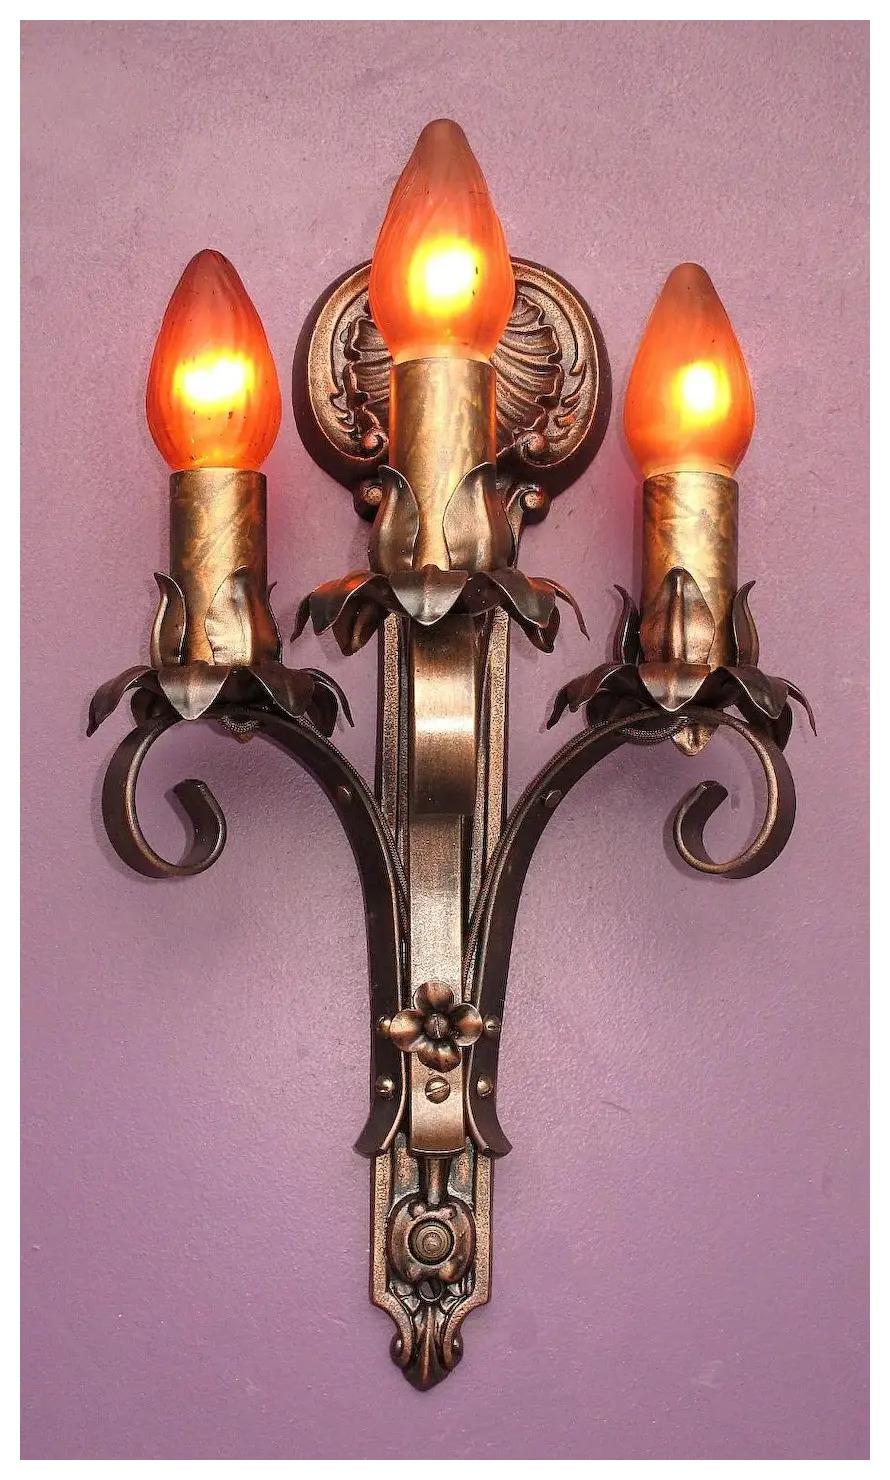 Priced per pair with 7 pair available.
Wonderful vintage three-arm wall sconces with six available. Classic in design and style with an excellent shell rosette at top giving them a slight nautical feel. All of these antique sconces are signed 